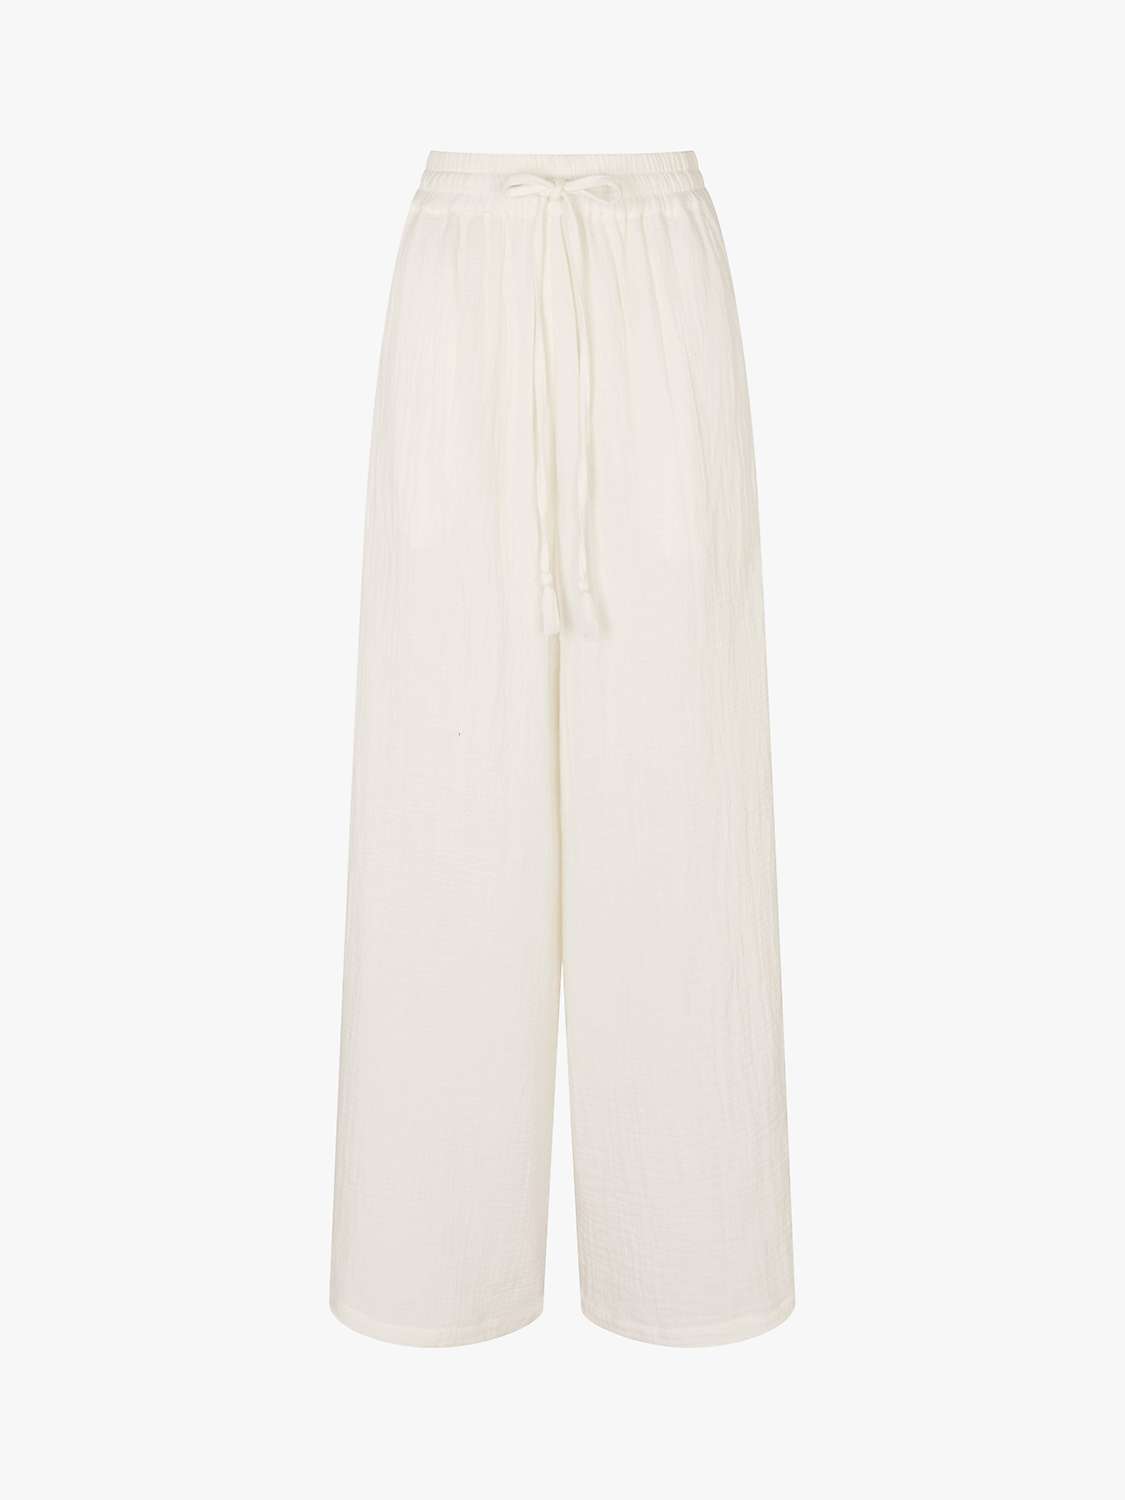 Buy Accessorize Crinkle Cotton Beach Trousers, White Online at johnlewis.com